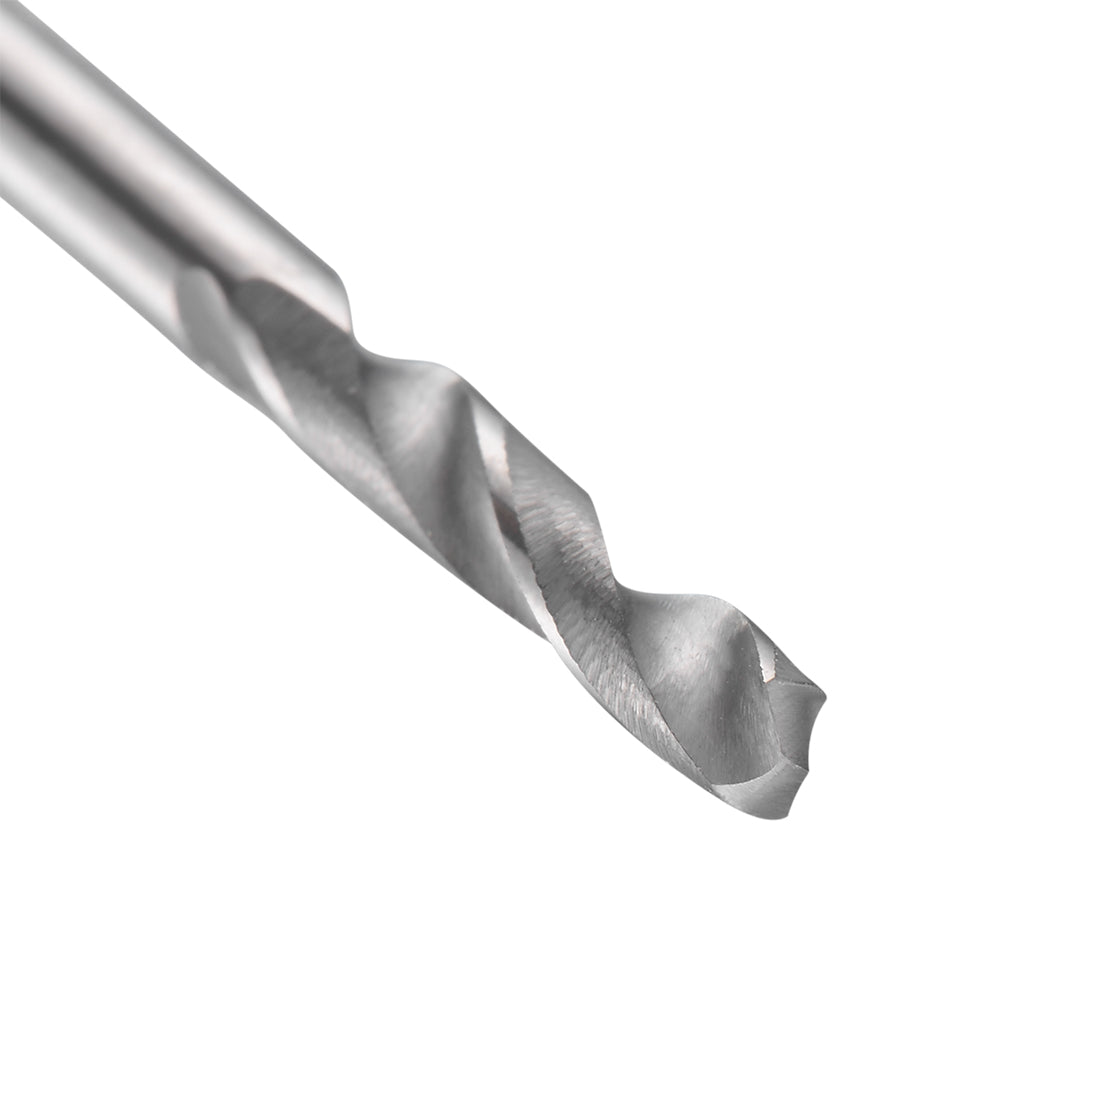 uxcell Uxcell 3.05mm Solid Carbide Drill Bits Straight Shank for Stainless Steel Alloy 2 Pcs